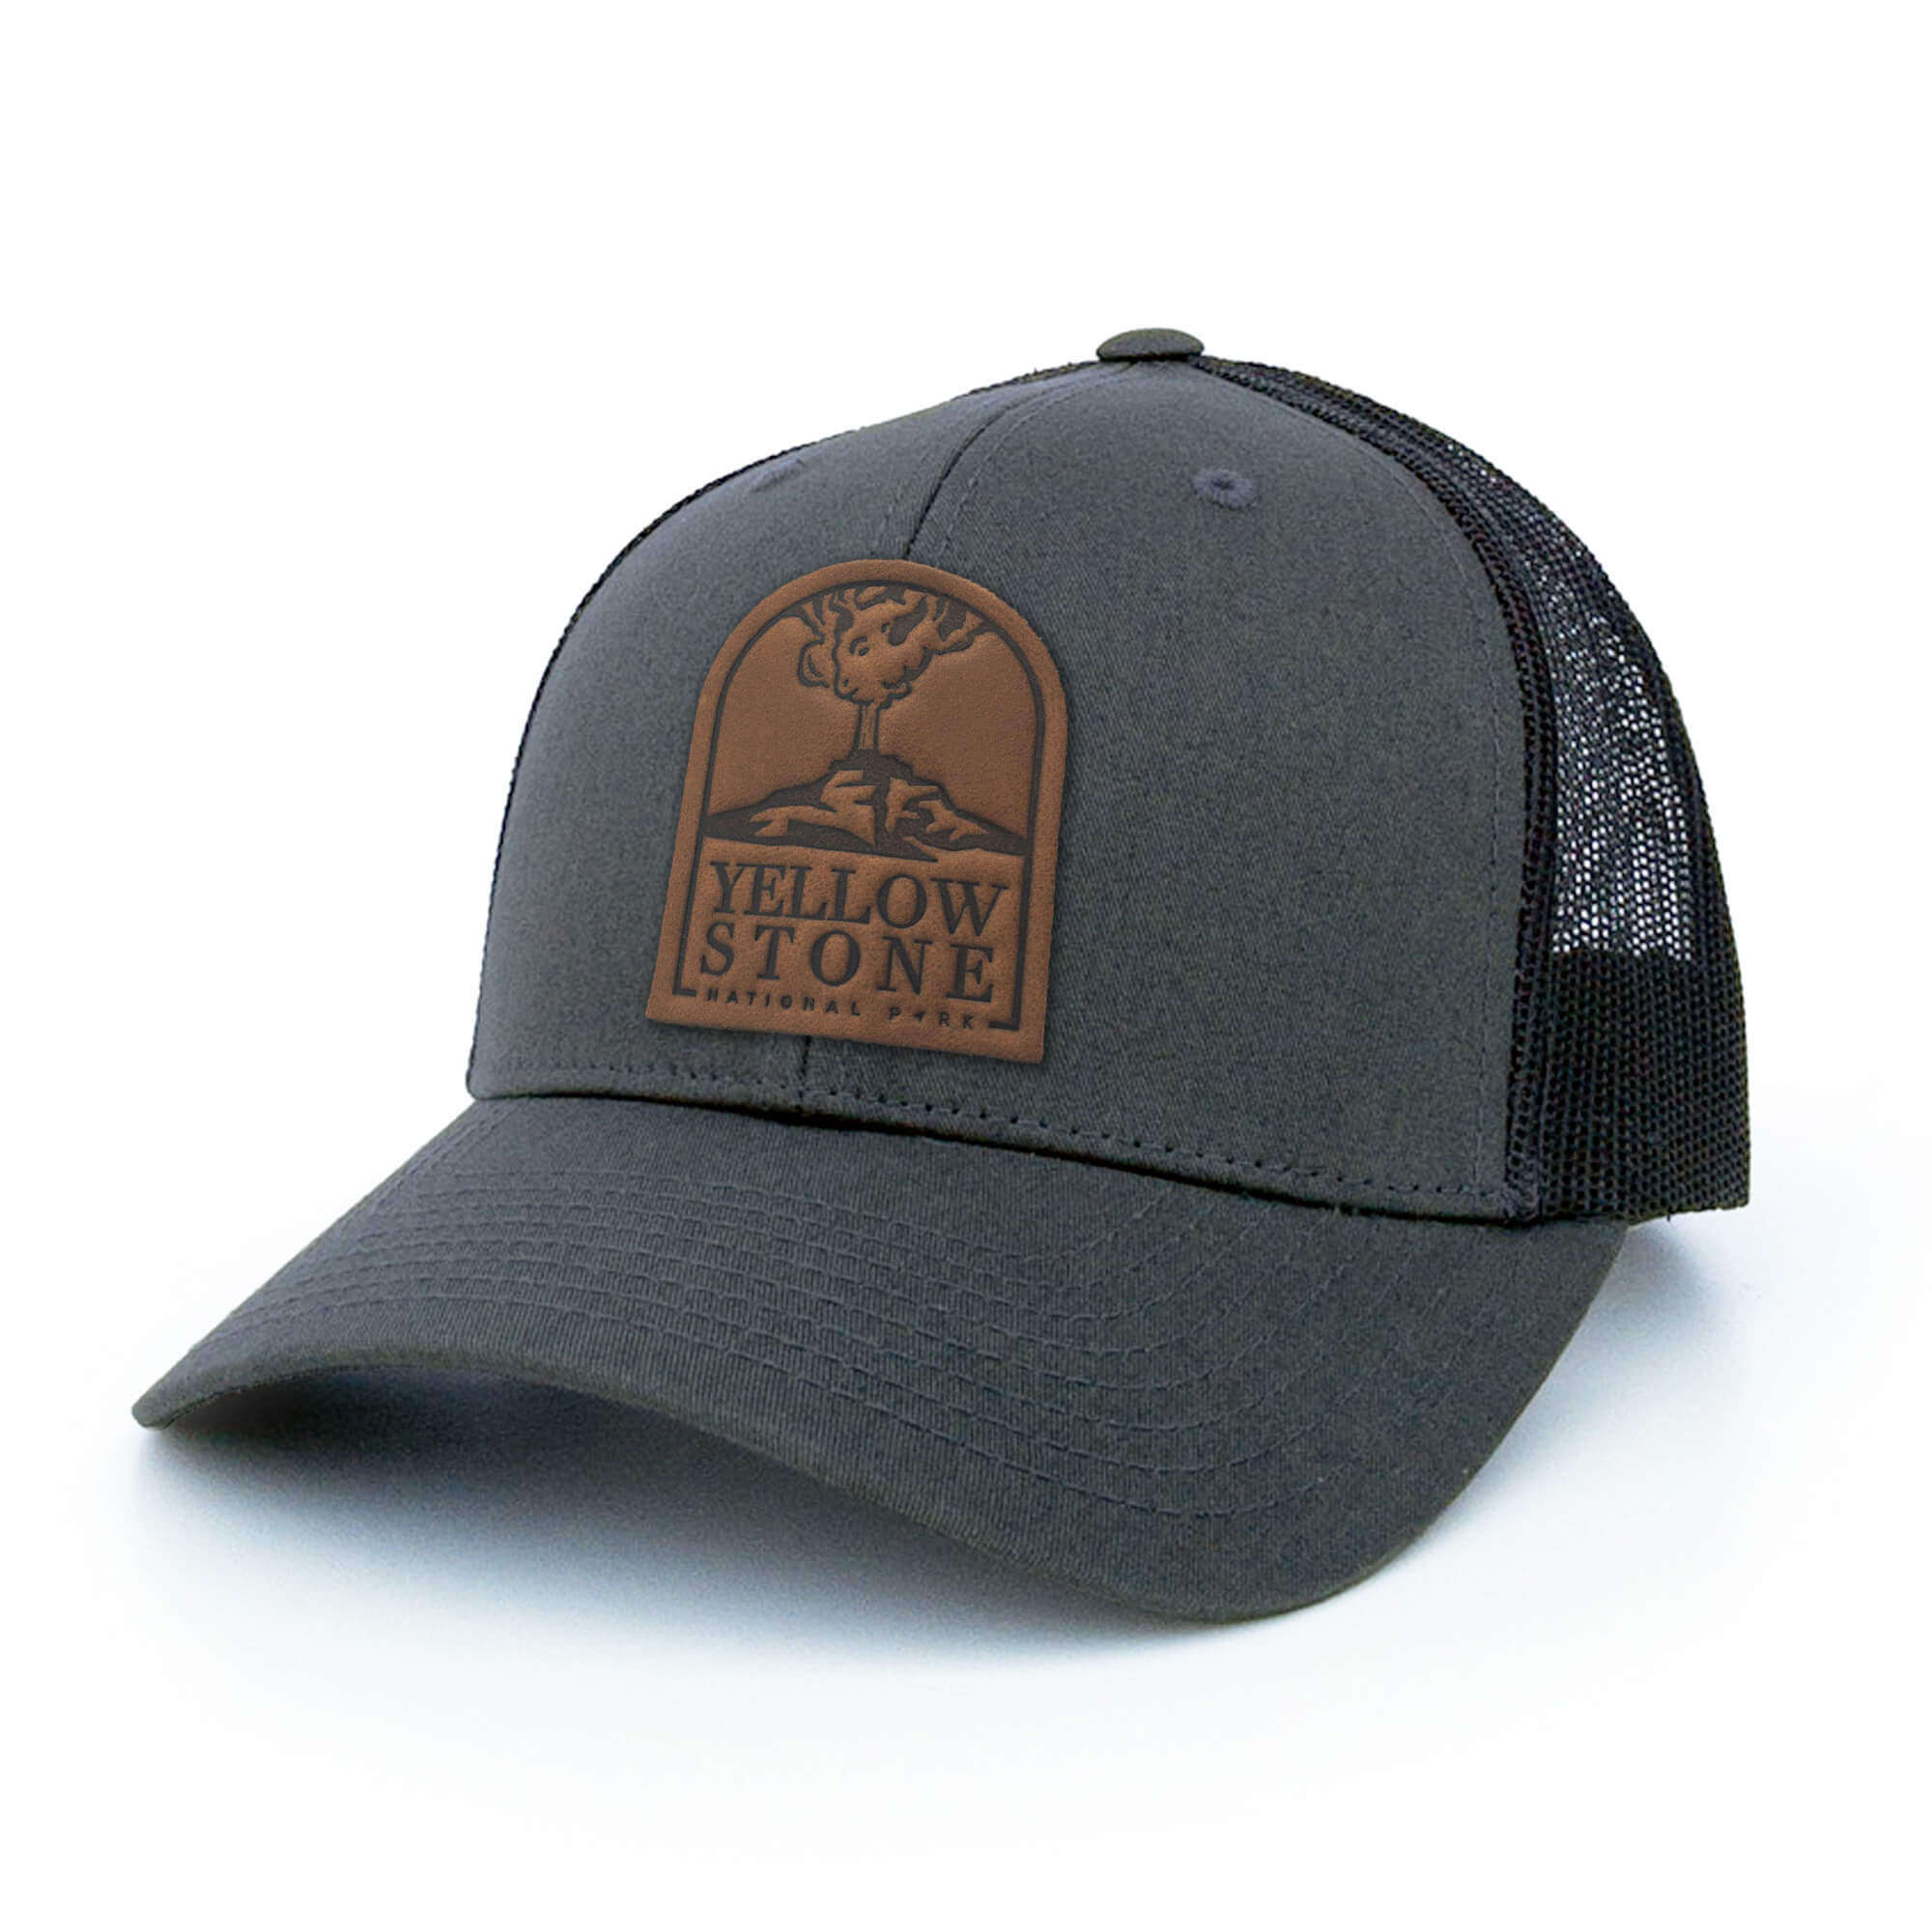 Charcoal trucker hat with full-grain leather patch of Yellowstone National Park | BLACK-007-005, CHARC-007-005, NAVY-007-005, HGREY-007-005, MOSS-007-005, BROWN-007-005